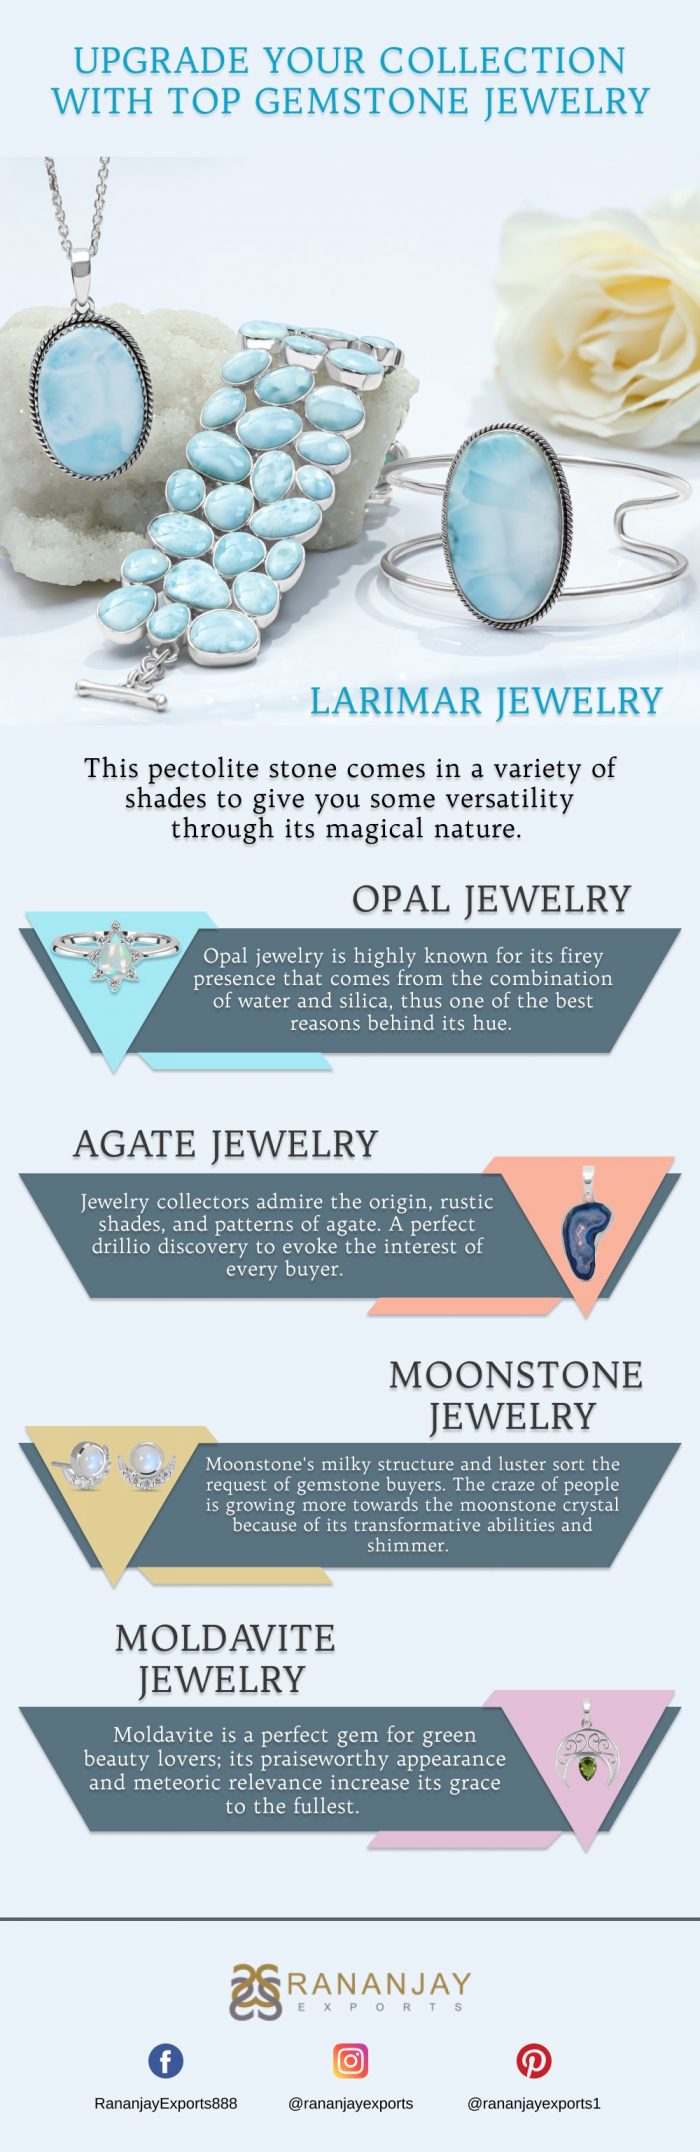 Upgrade your collection with top gemstone jewelry